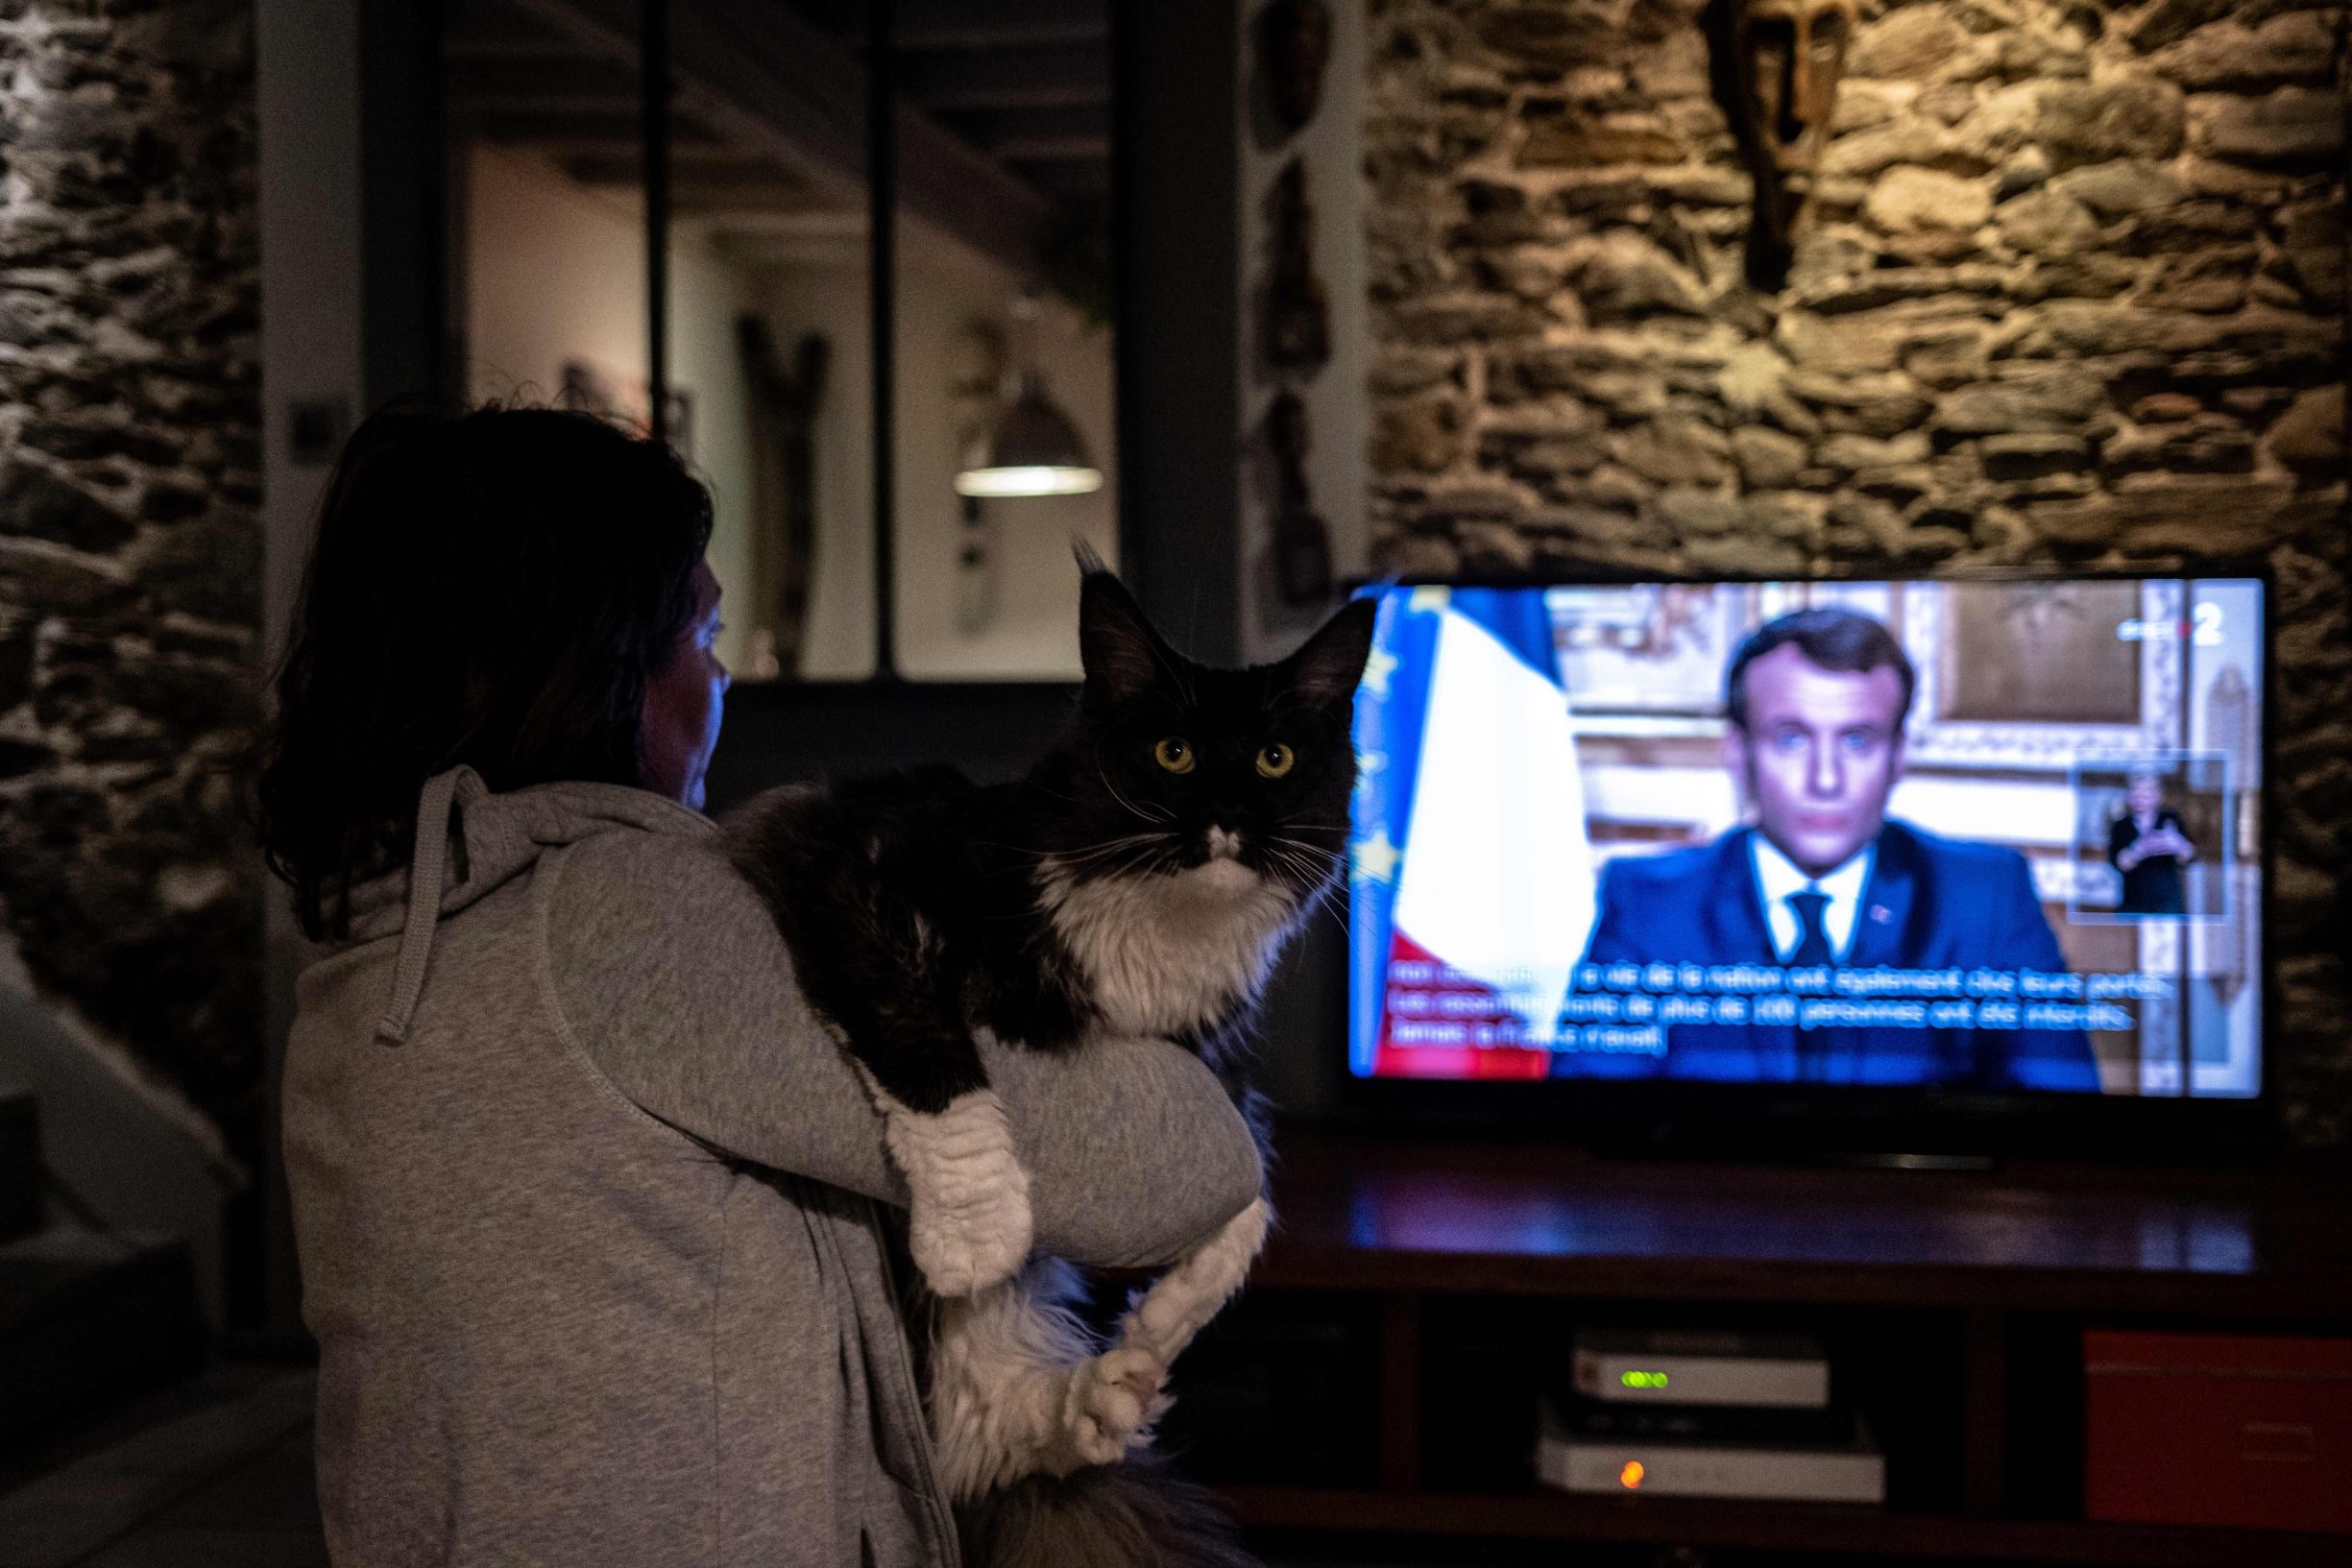 A person holds a catch while watching Frrench President Emmanuel Macron in Givors near Lyon, as he speaks from Paris during a televised address to the nation on the outbreak of COVID-19, caused by the novel coronavirus, on March 16, 2020. - The French president addresses the nation, with many expecting him to unveil more strict home confinement rules in a bid to prevent the virus from spreading. France has closed down all schools, theatres, cinemas and a range of shops, with only those selling food and other essential items allowed to remain open. The balance sheet of the epidemic climbed to 127 dead and 5,423 confirmed cases in France. (Photo by JEAN-PHILIPPE KSIAZEK / AFP)